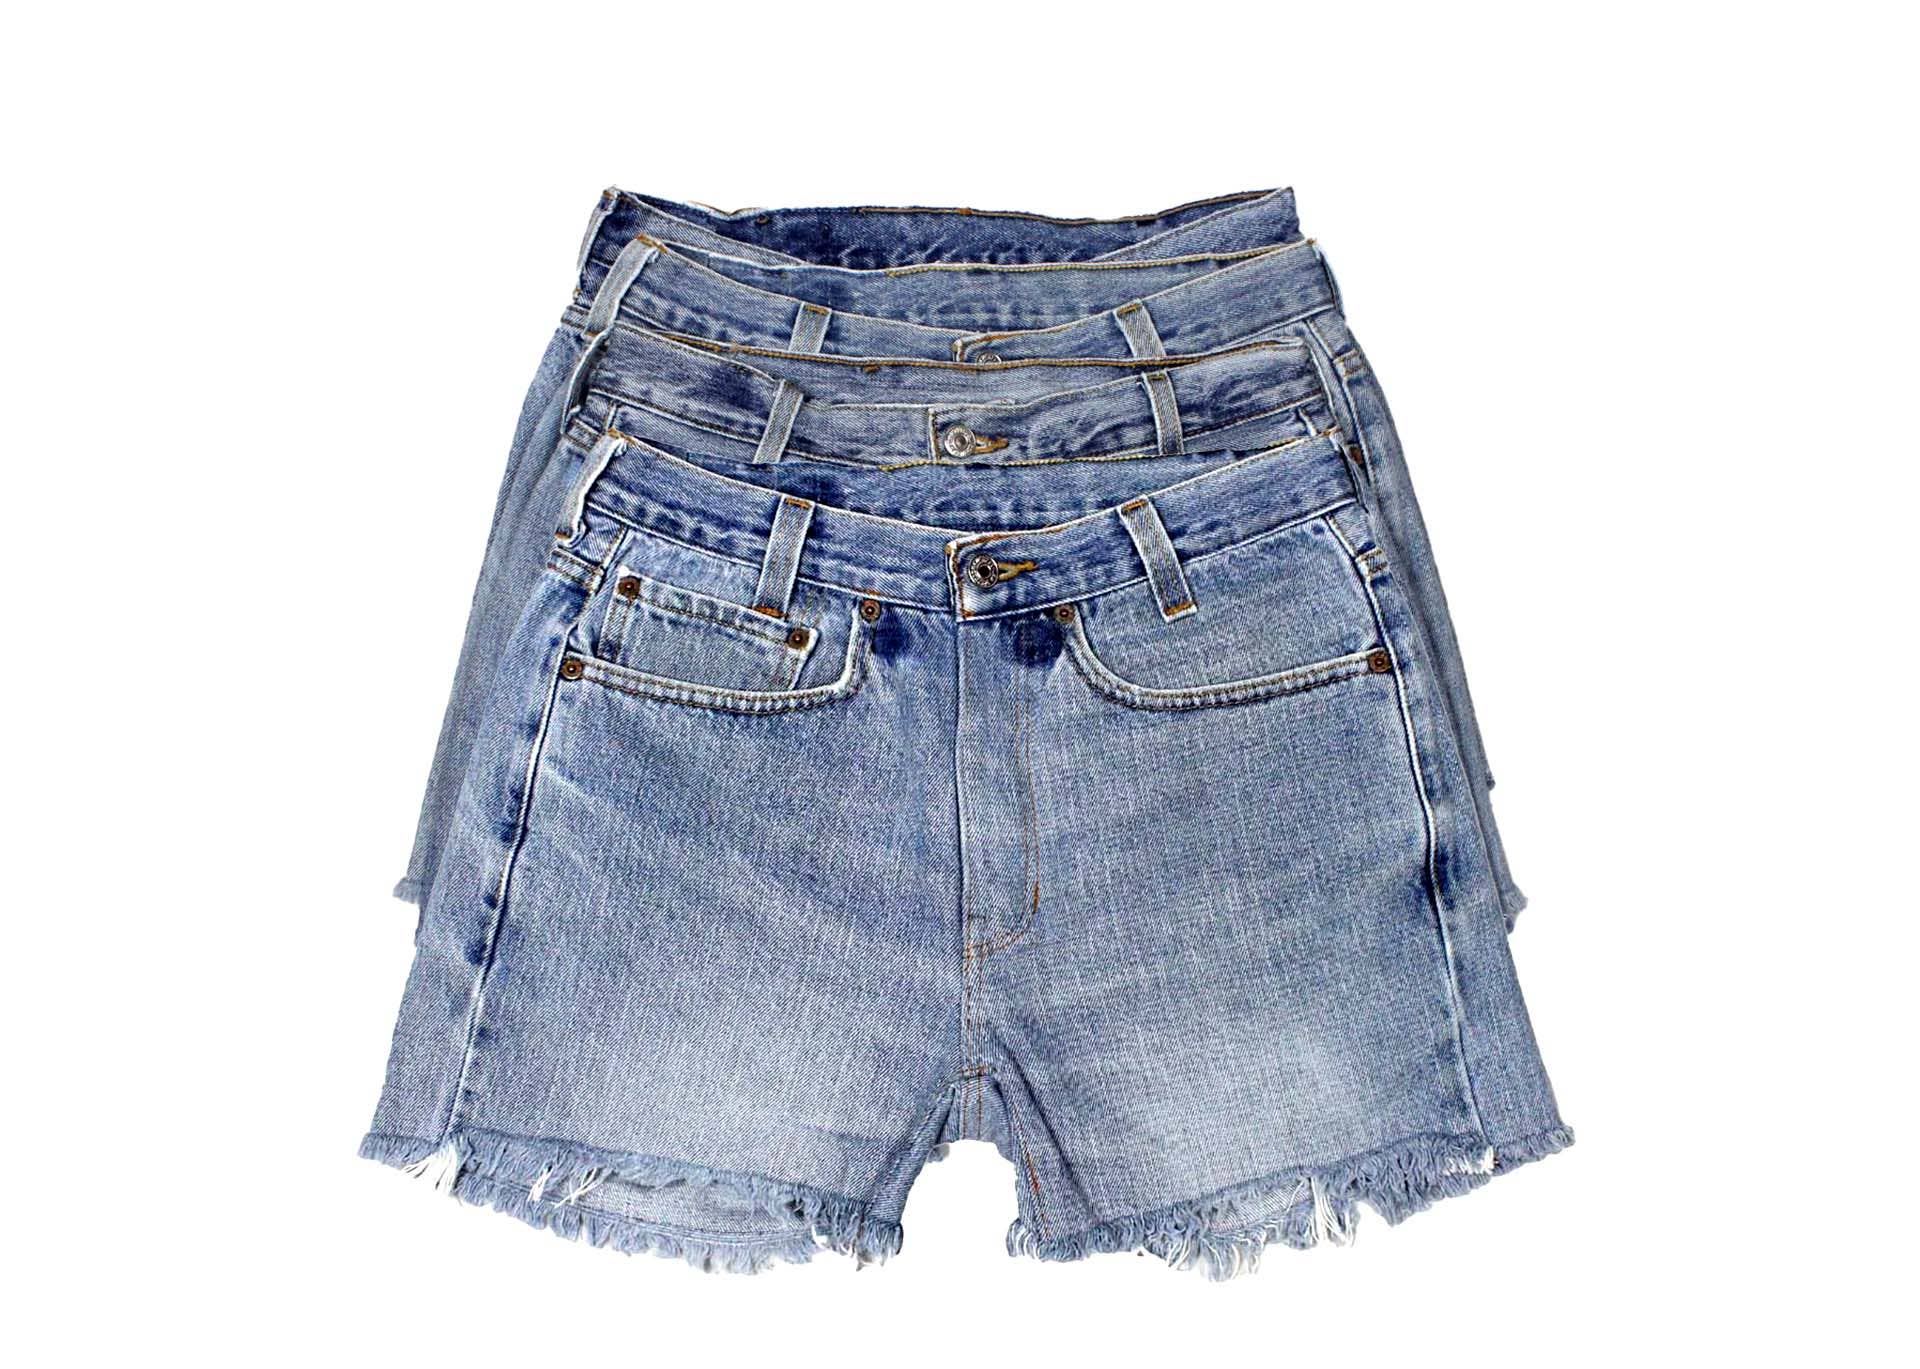 Sun's Out! - Mid-Rise Upcycled Denim Straight-Cut Shorts - Original